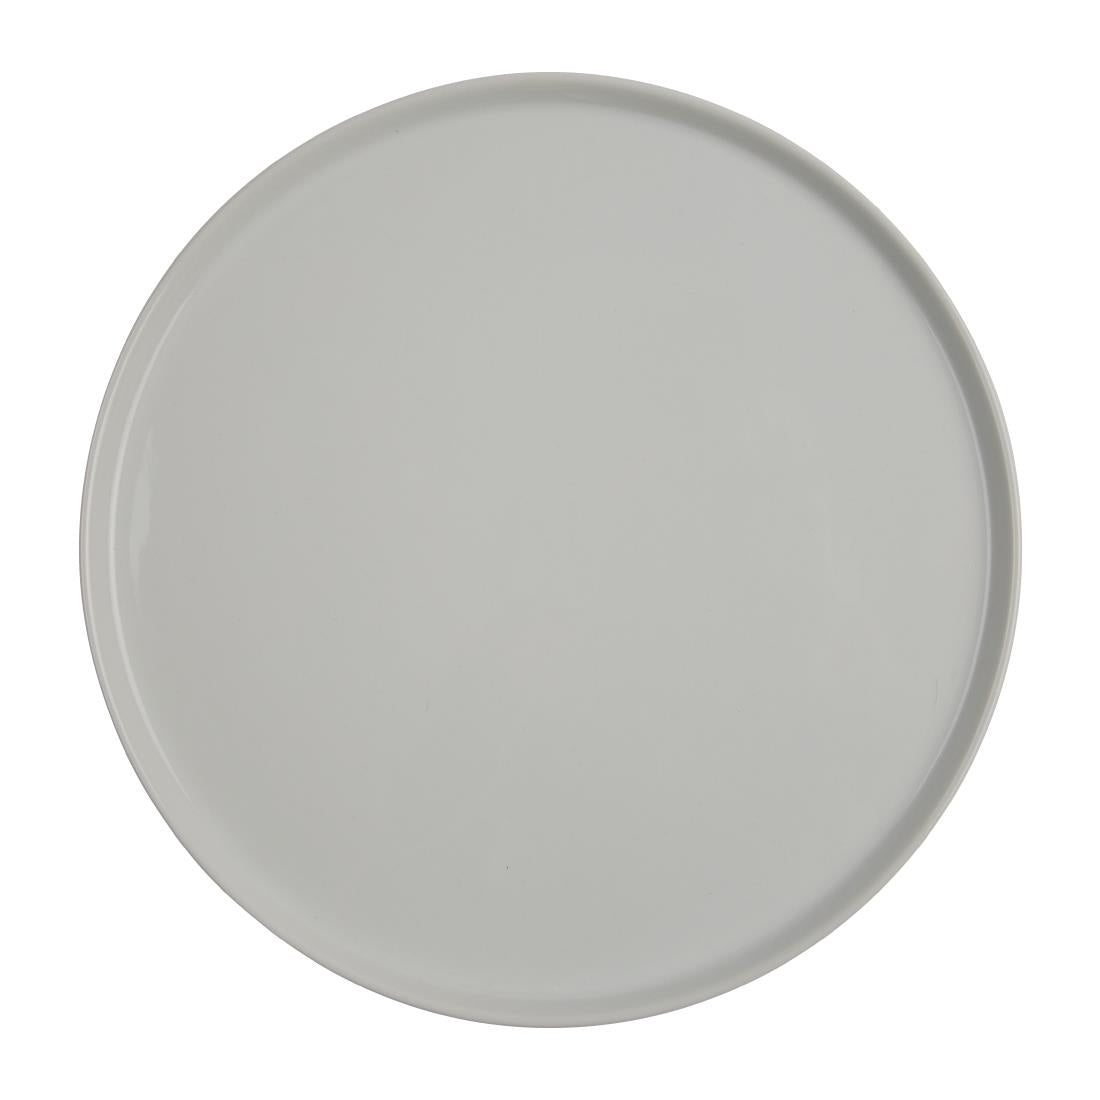 CD723 Olympia Whiteware Pizza Plates 330mm (Pack of 4) JD Catering Equipment Solutions Ltd